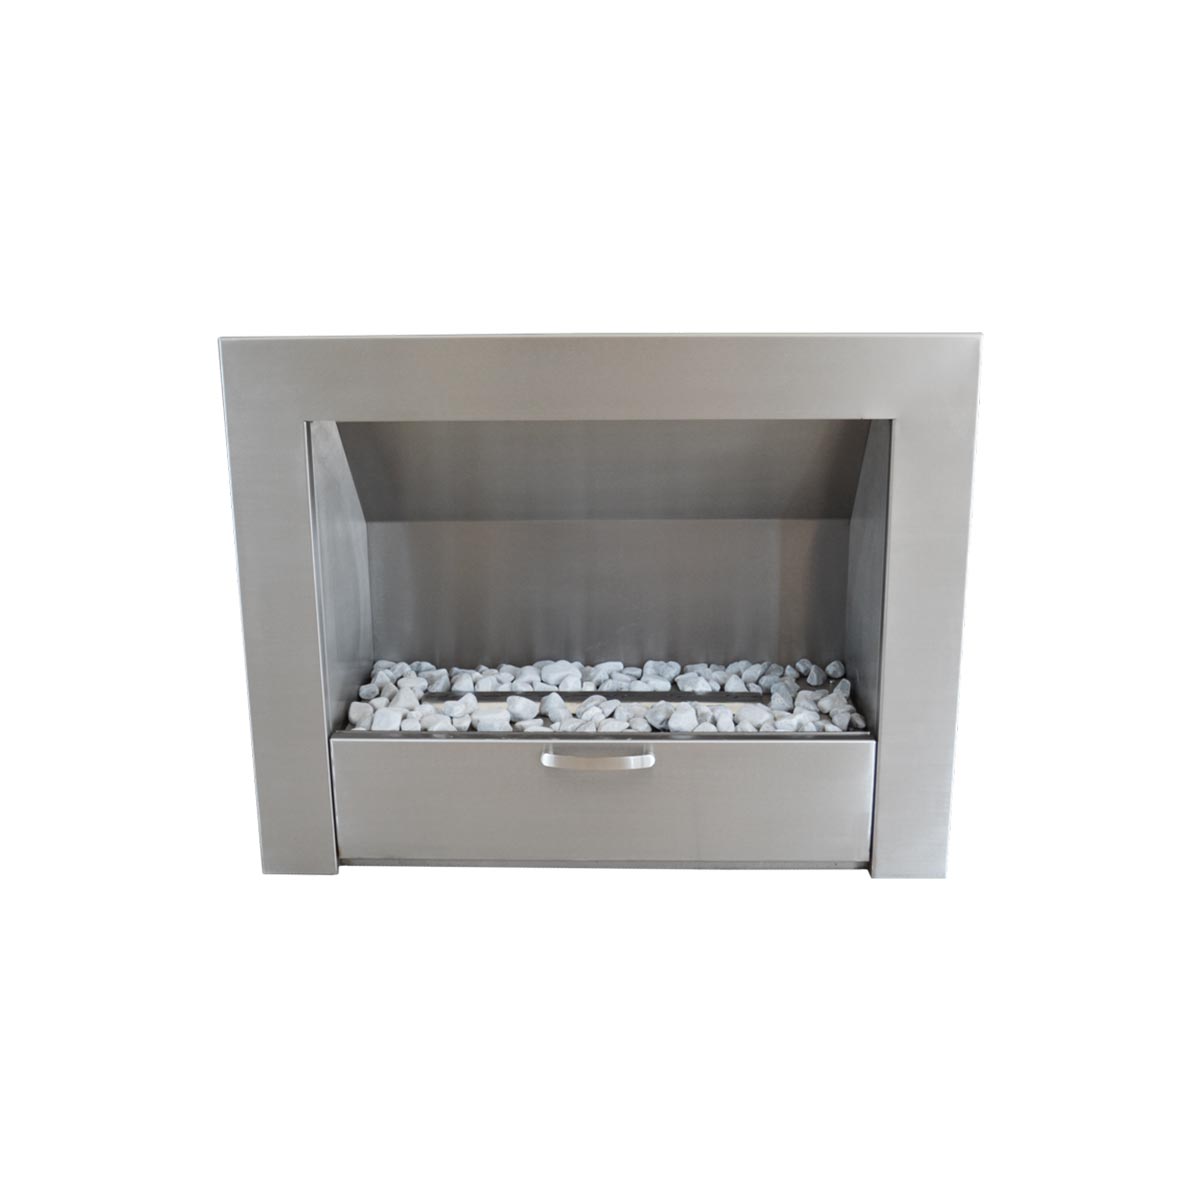 Megamaster New Single Sided Fireplace – Stainless Steel